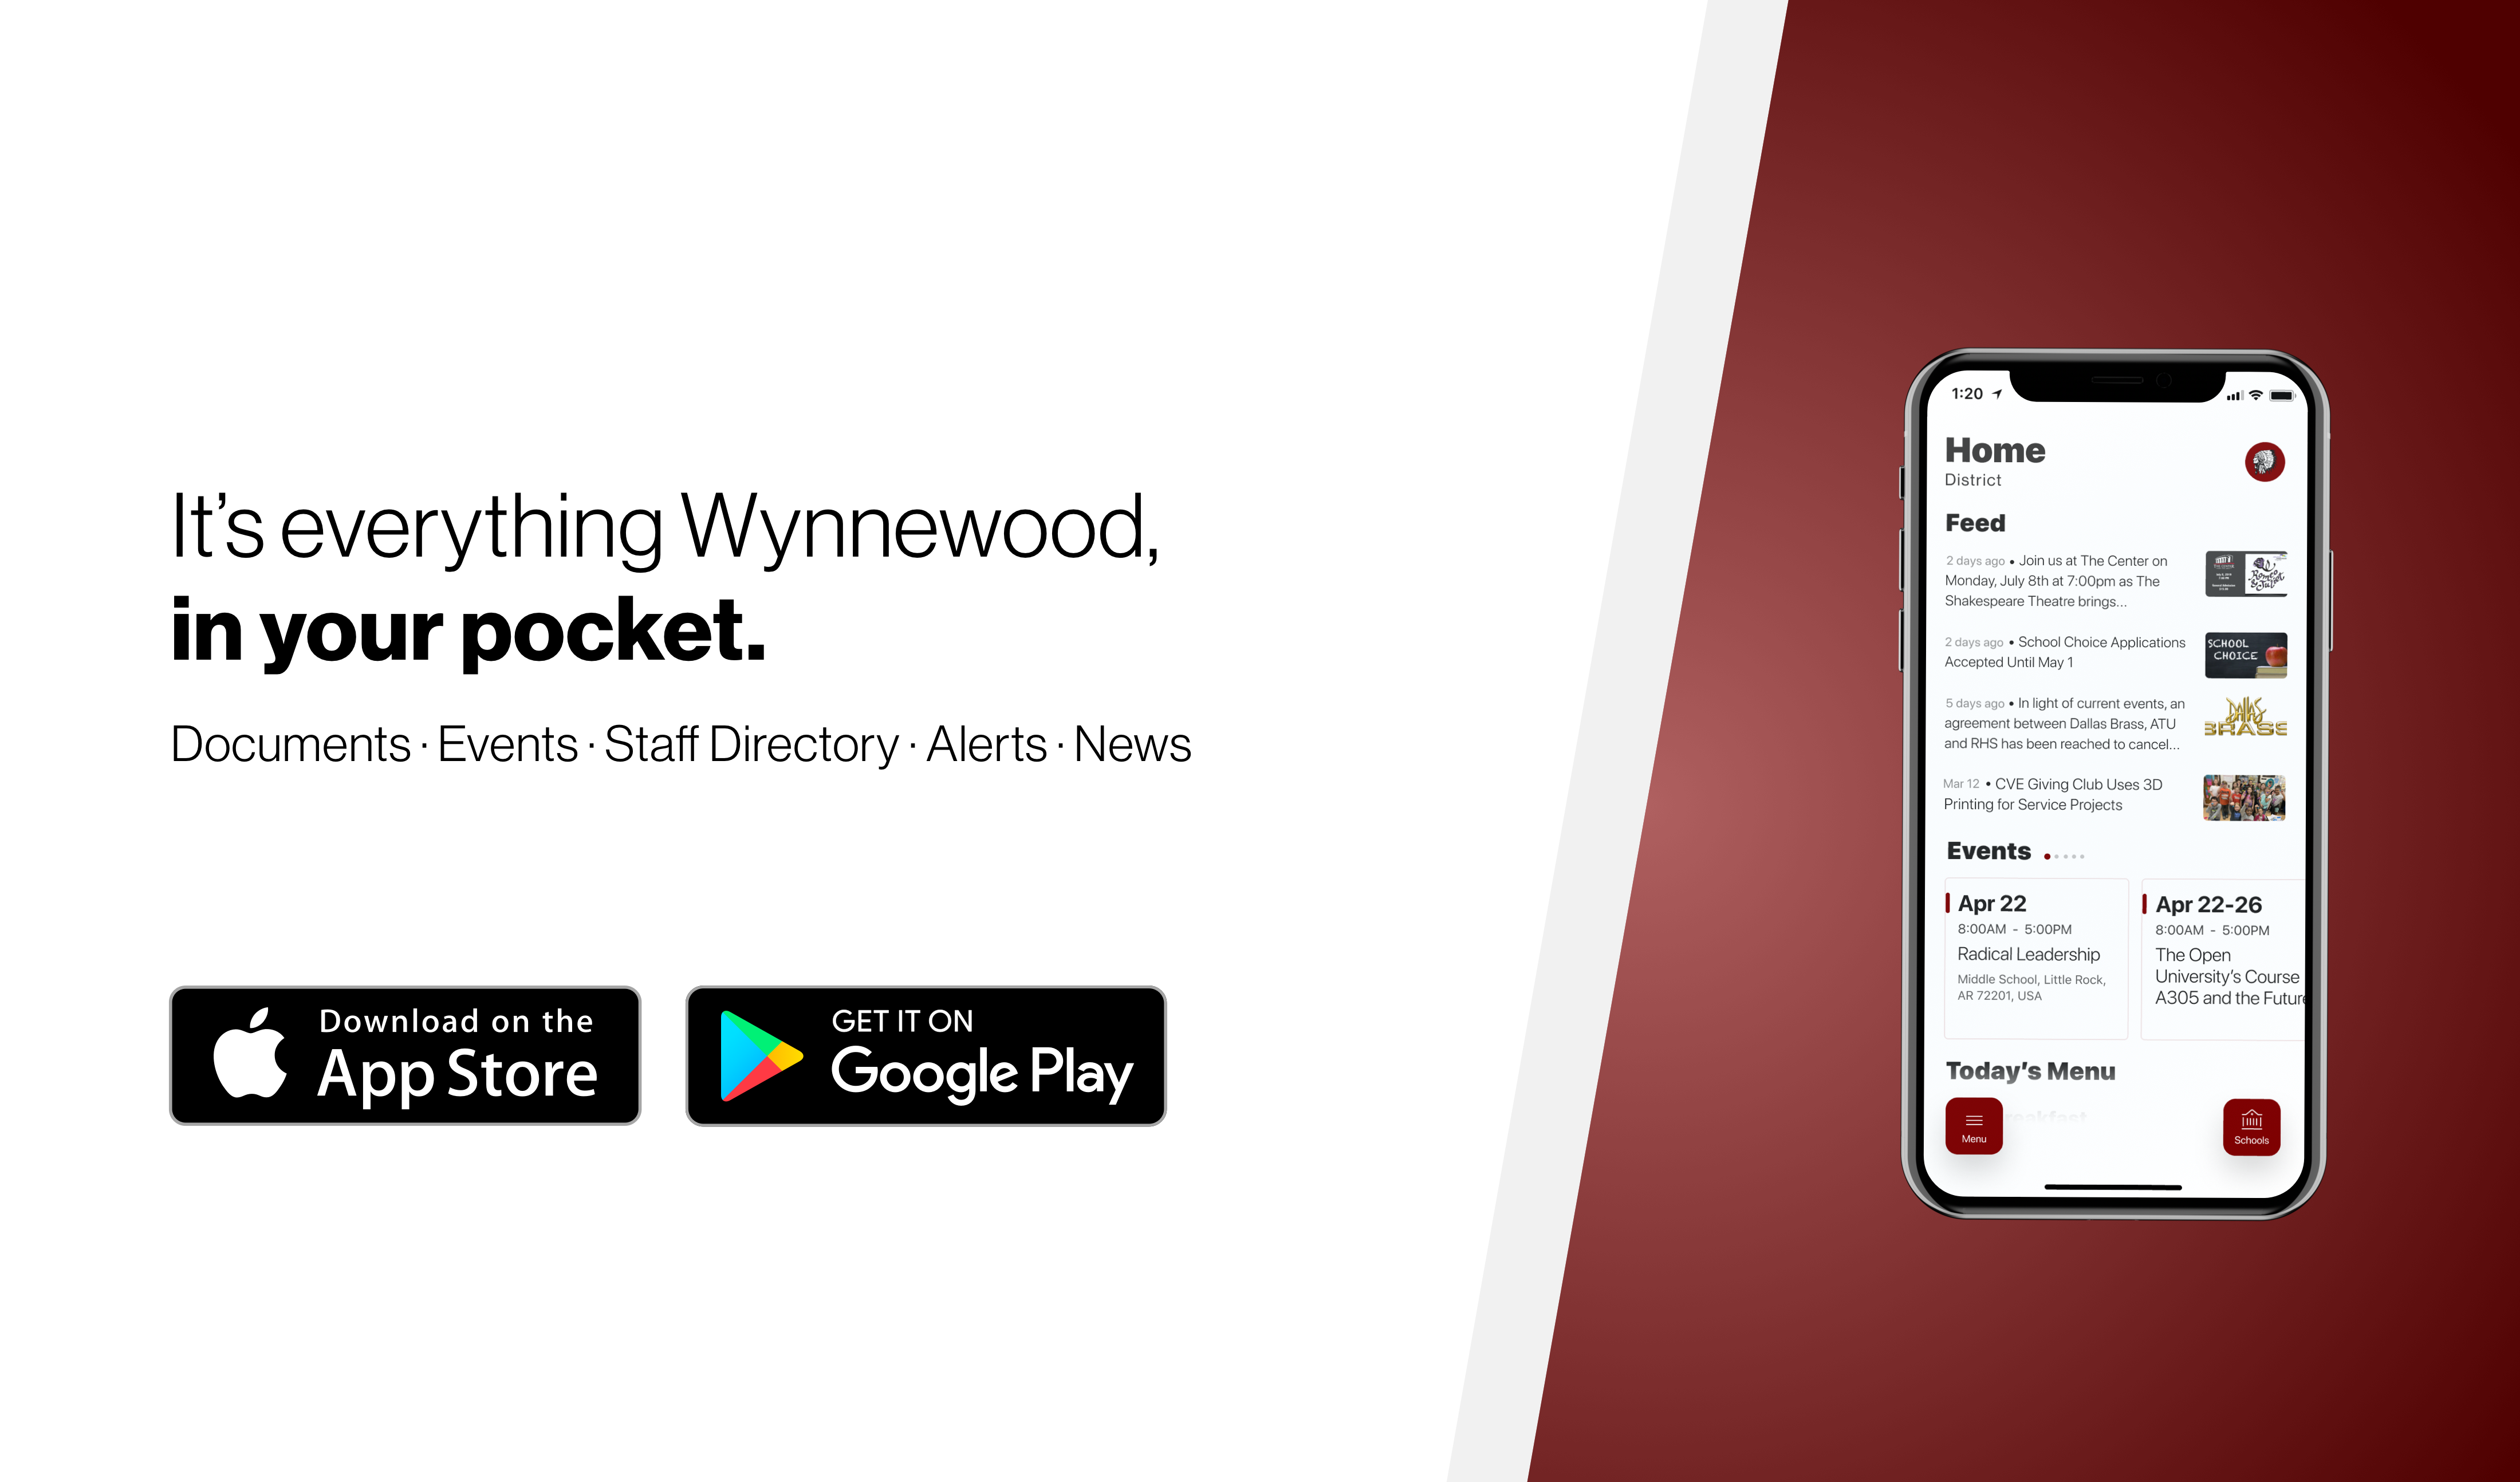 It's everything Wynnewood in your pocket.